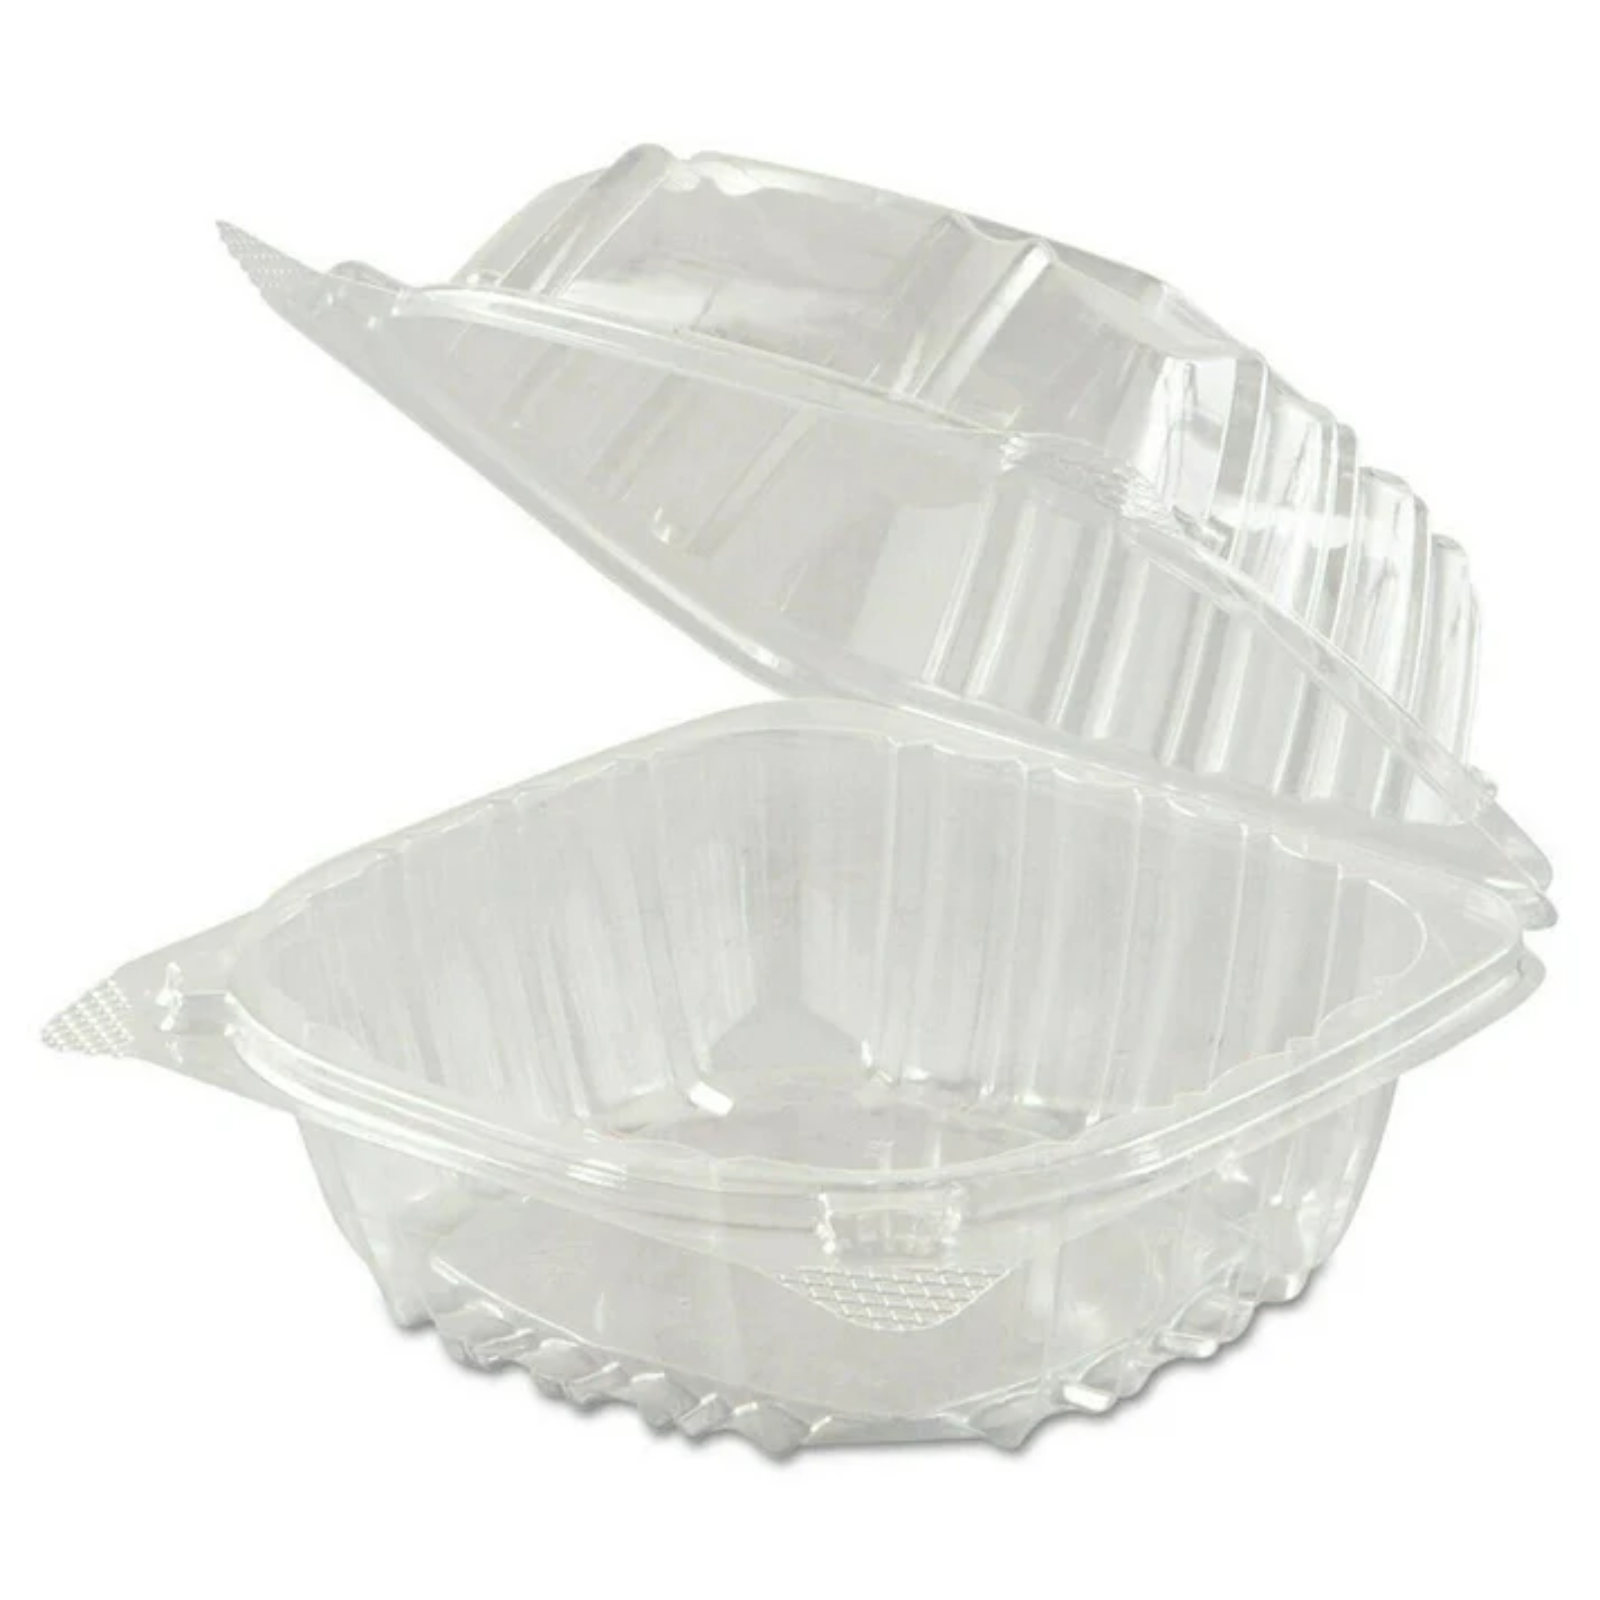 DART Model # C57PST1| ClearSeal Hinged Lid Plastic Container Salad Containers Dart   